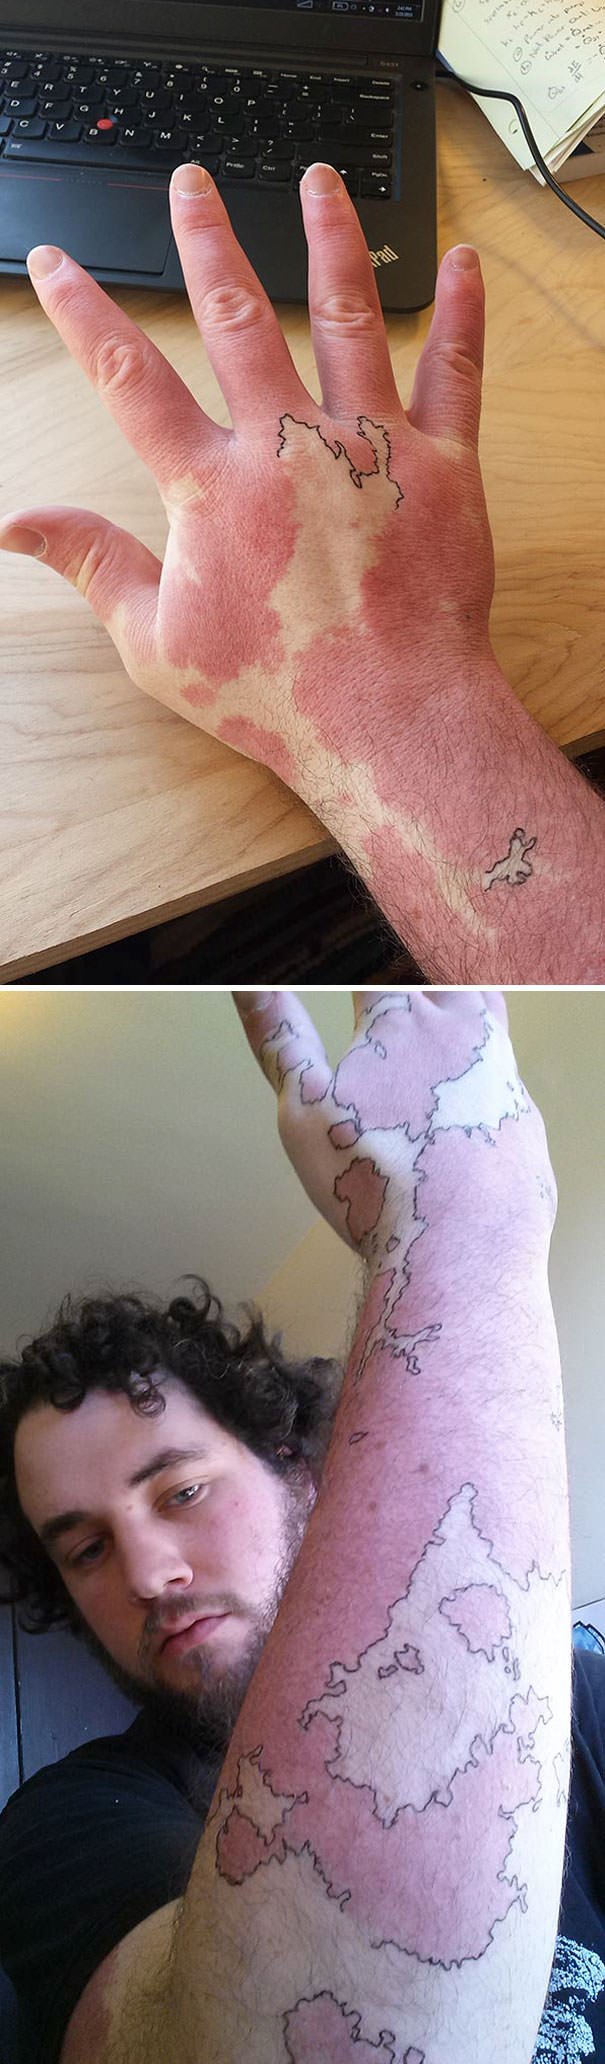 Guy transformed his birthmark into a map of an imaginary world by drawing around it with a pen